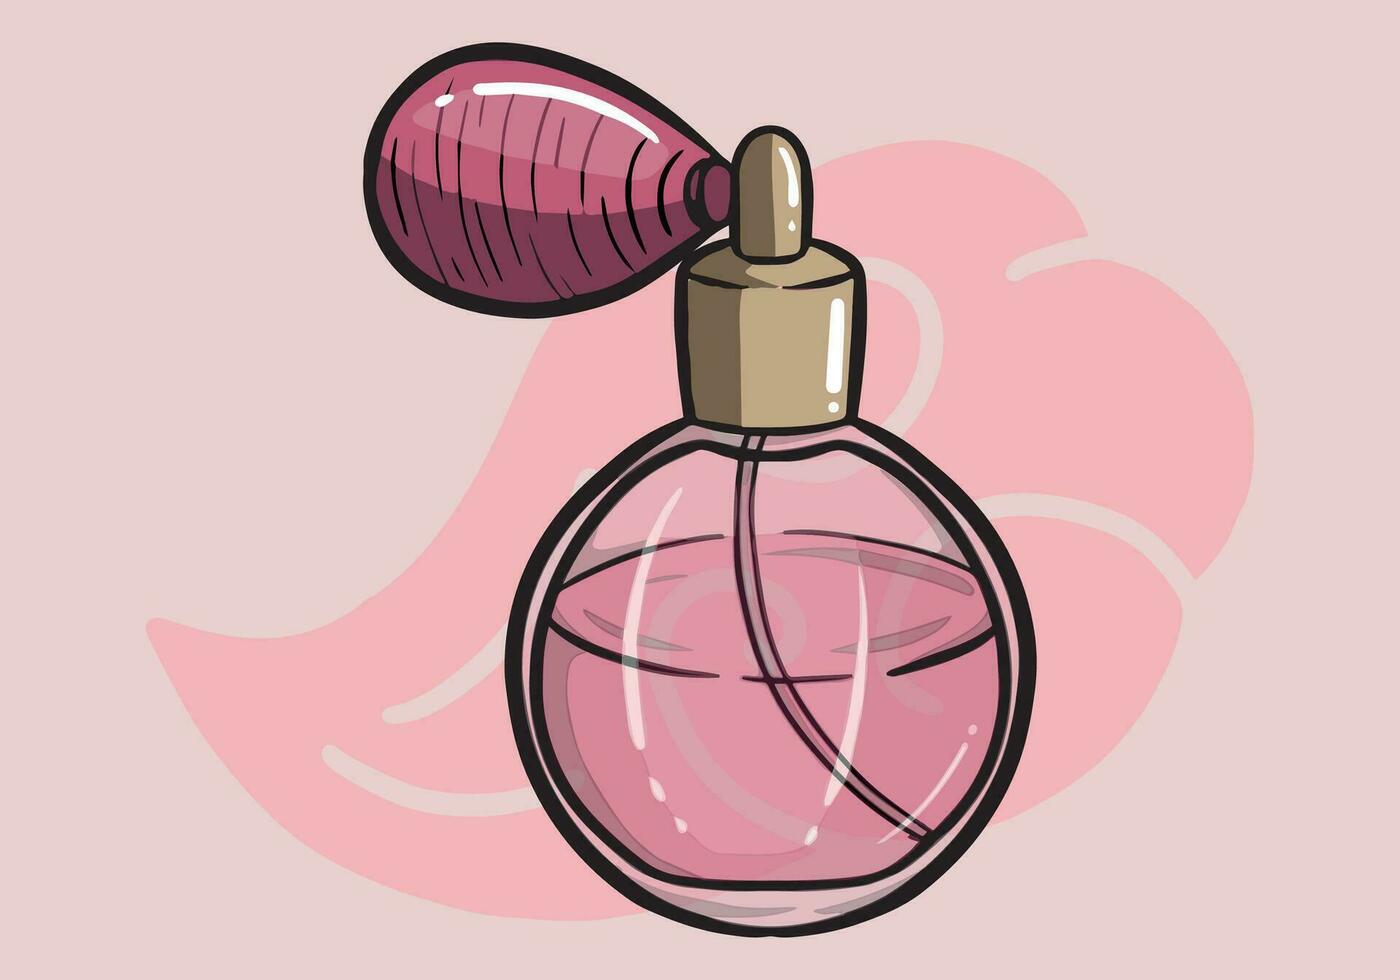 Perfume Bottle, Colorful Glass Vials and Flasks with Sprayer and Pump. Aroma Scents Cosmetics for Men or Women, Luxury Fragrances Isolated Design Elements. Cartoon Vector Illustration